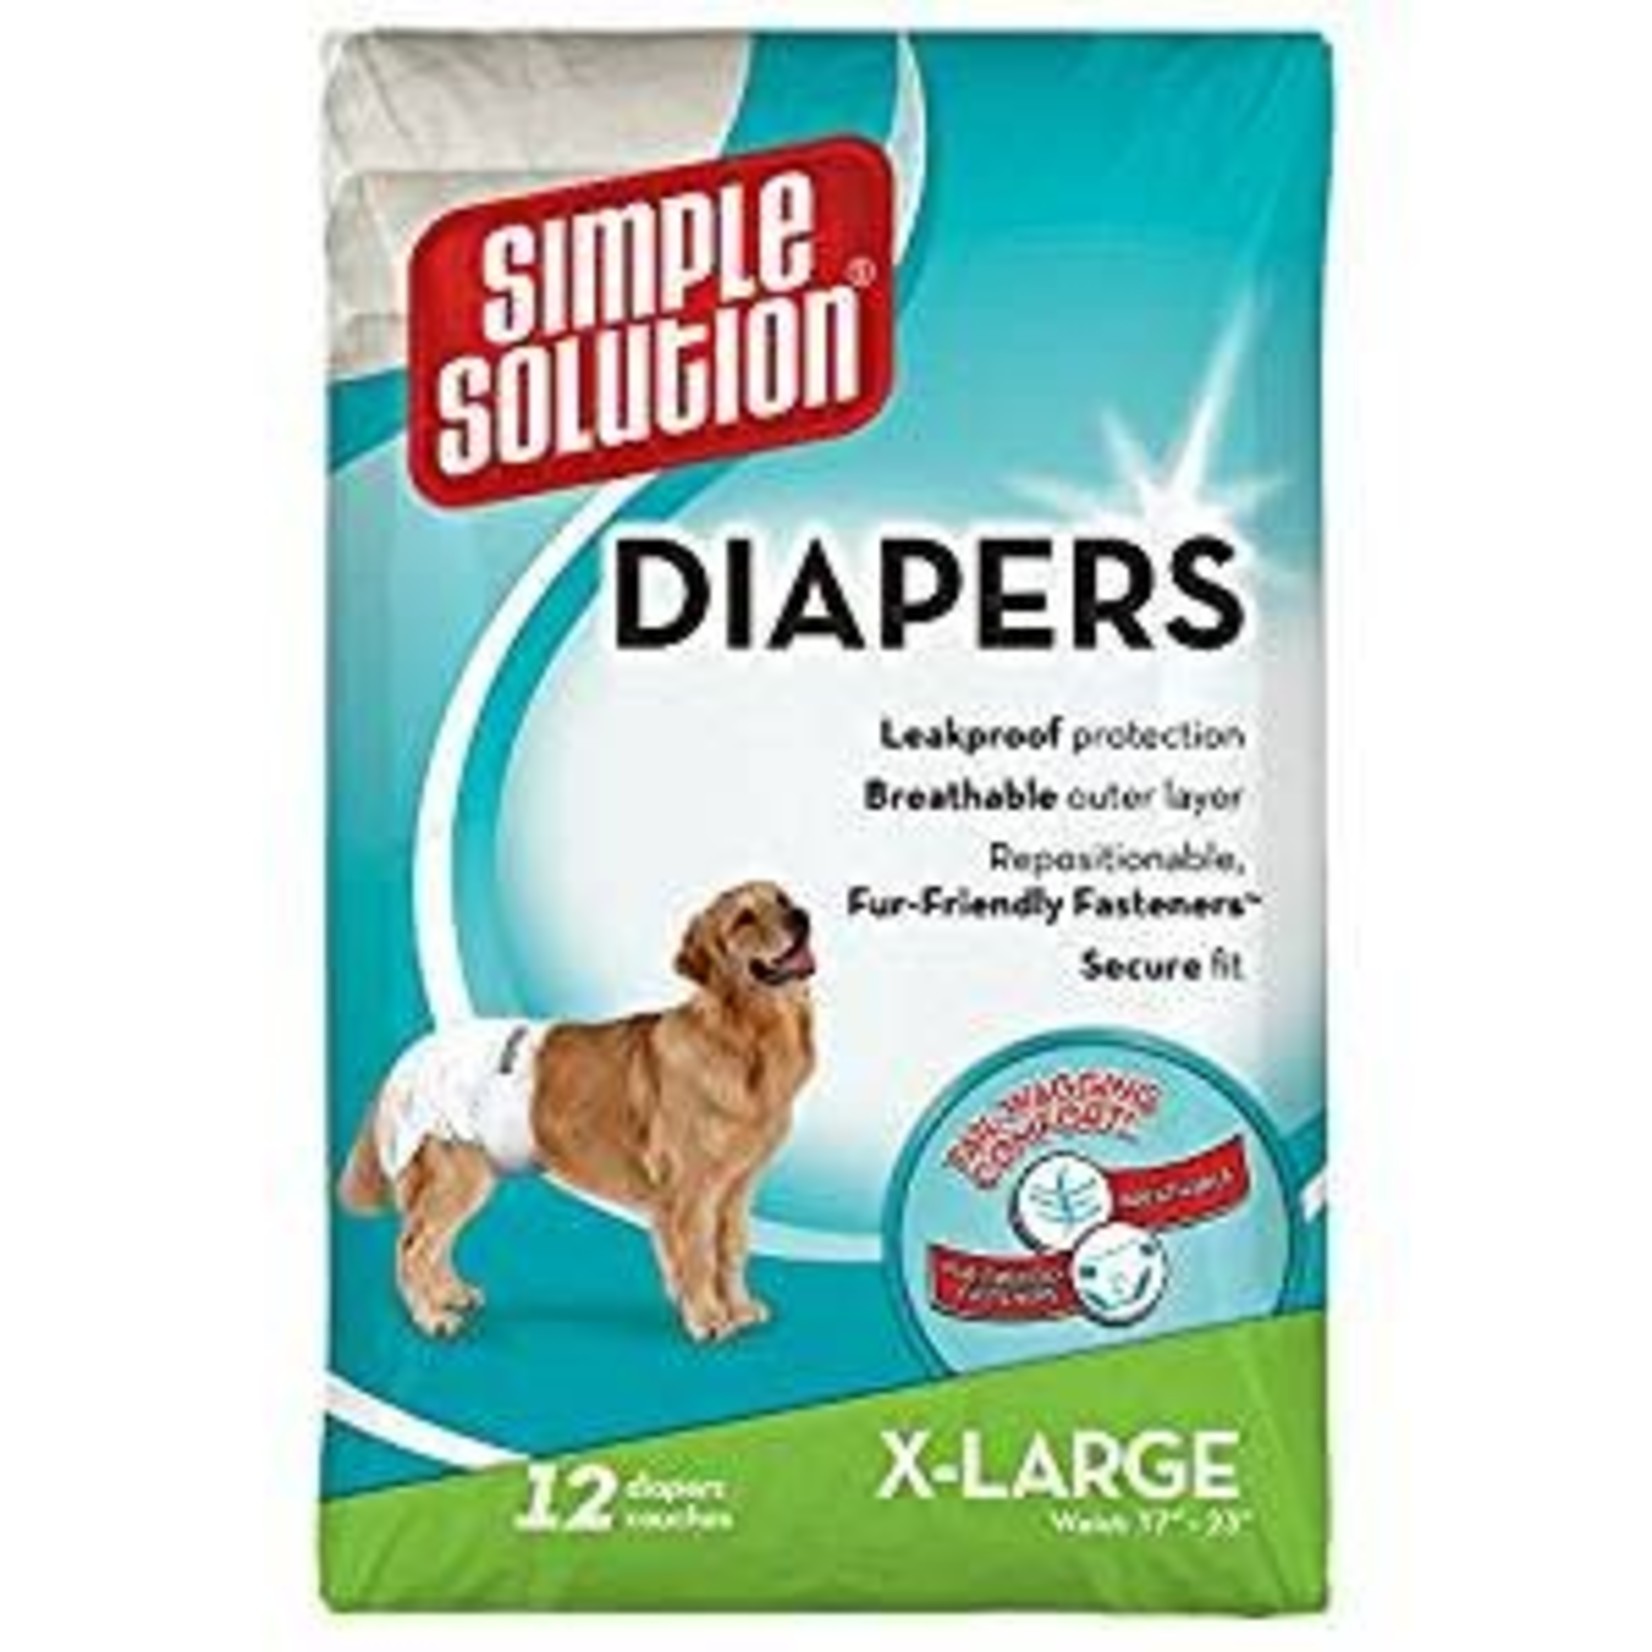 Simple Solutions Simple Solution Diapers X-Large